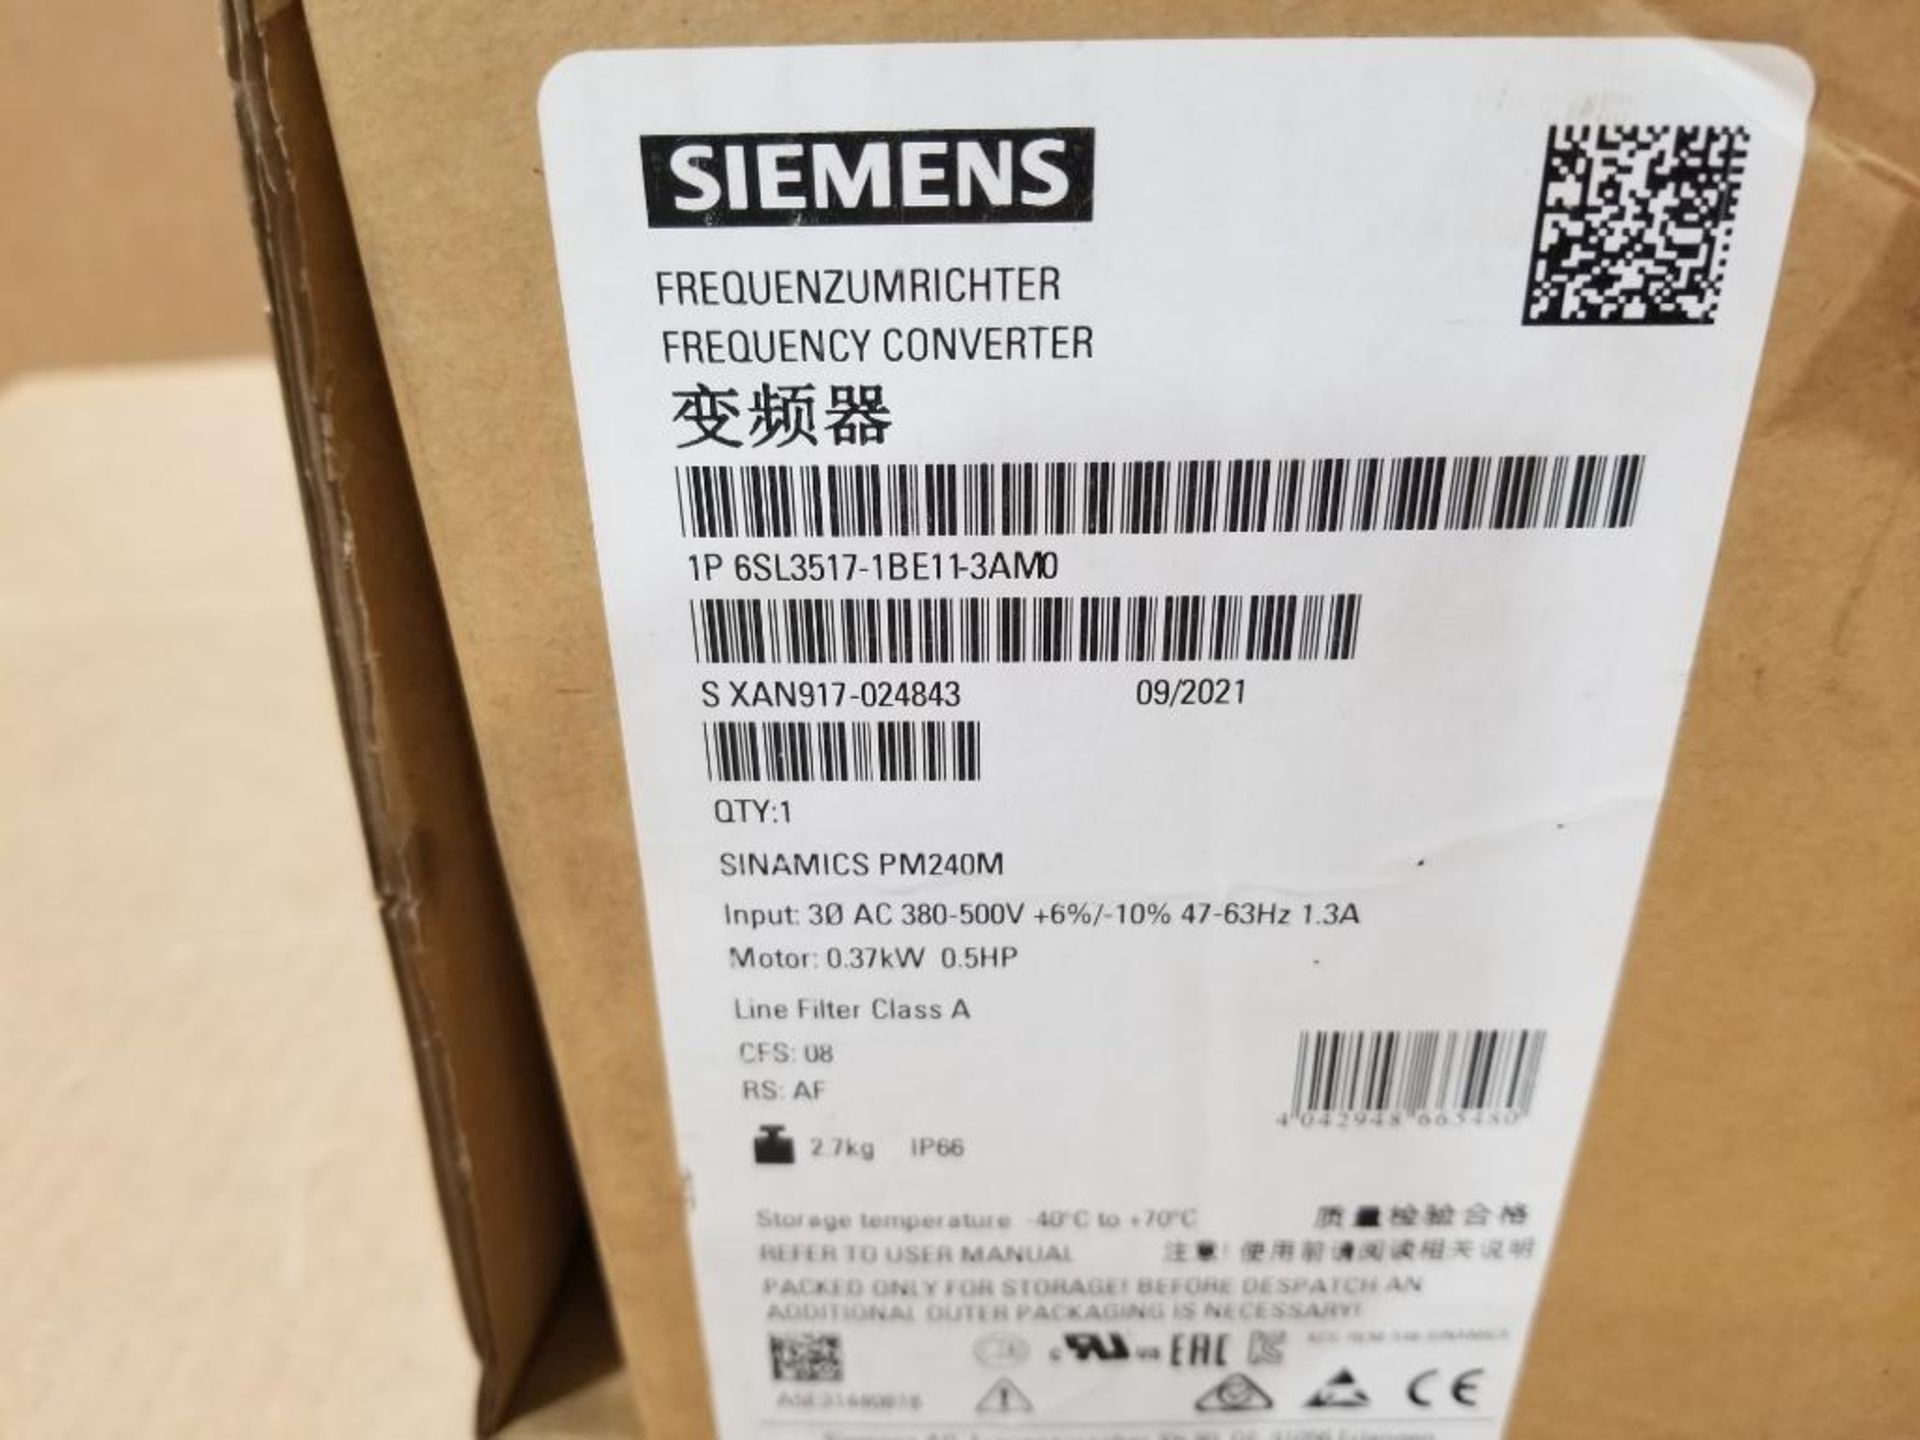 Siemens frequency converter. Part number 6SL3517-1BE11-3AM0. - Image 2 of 3